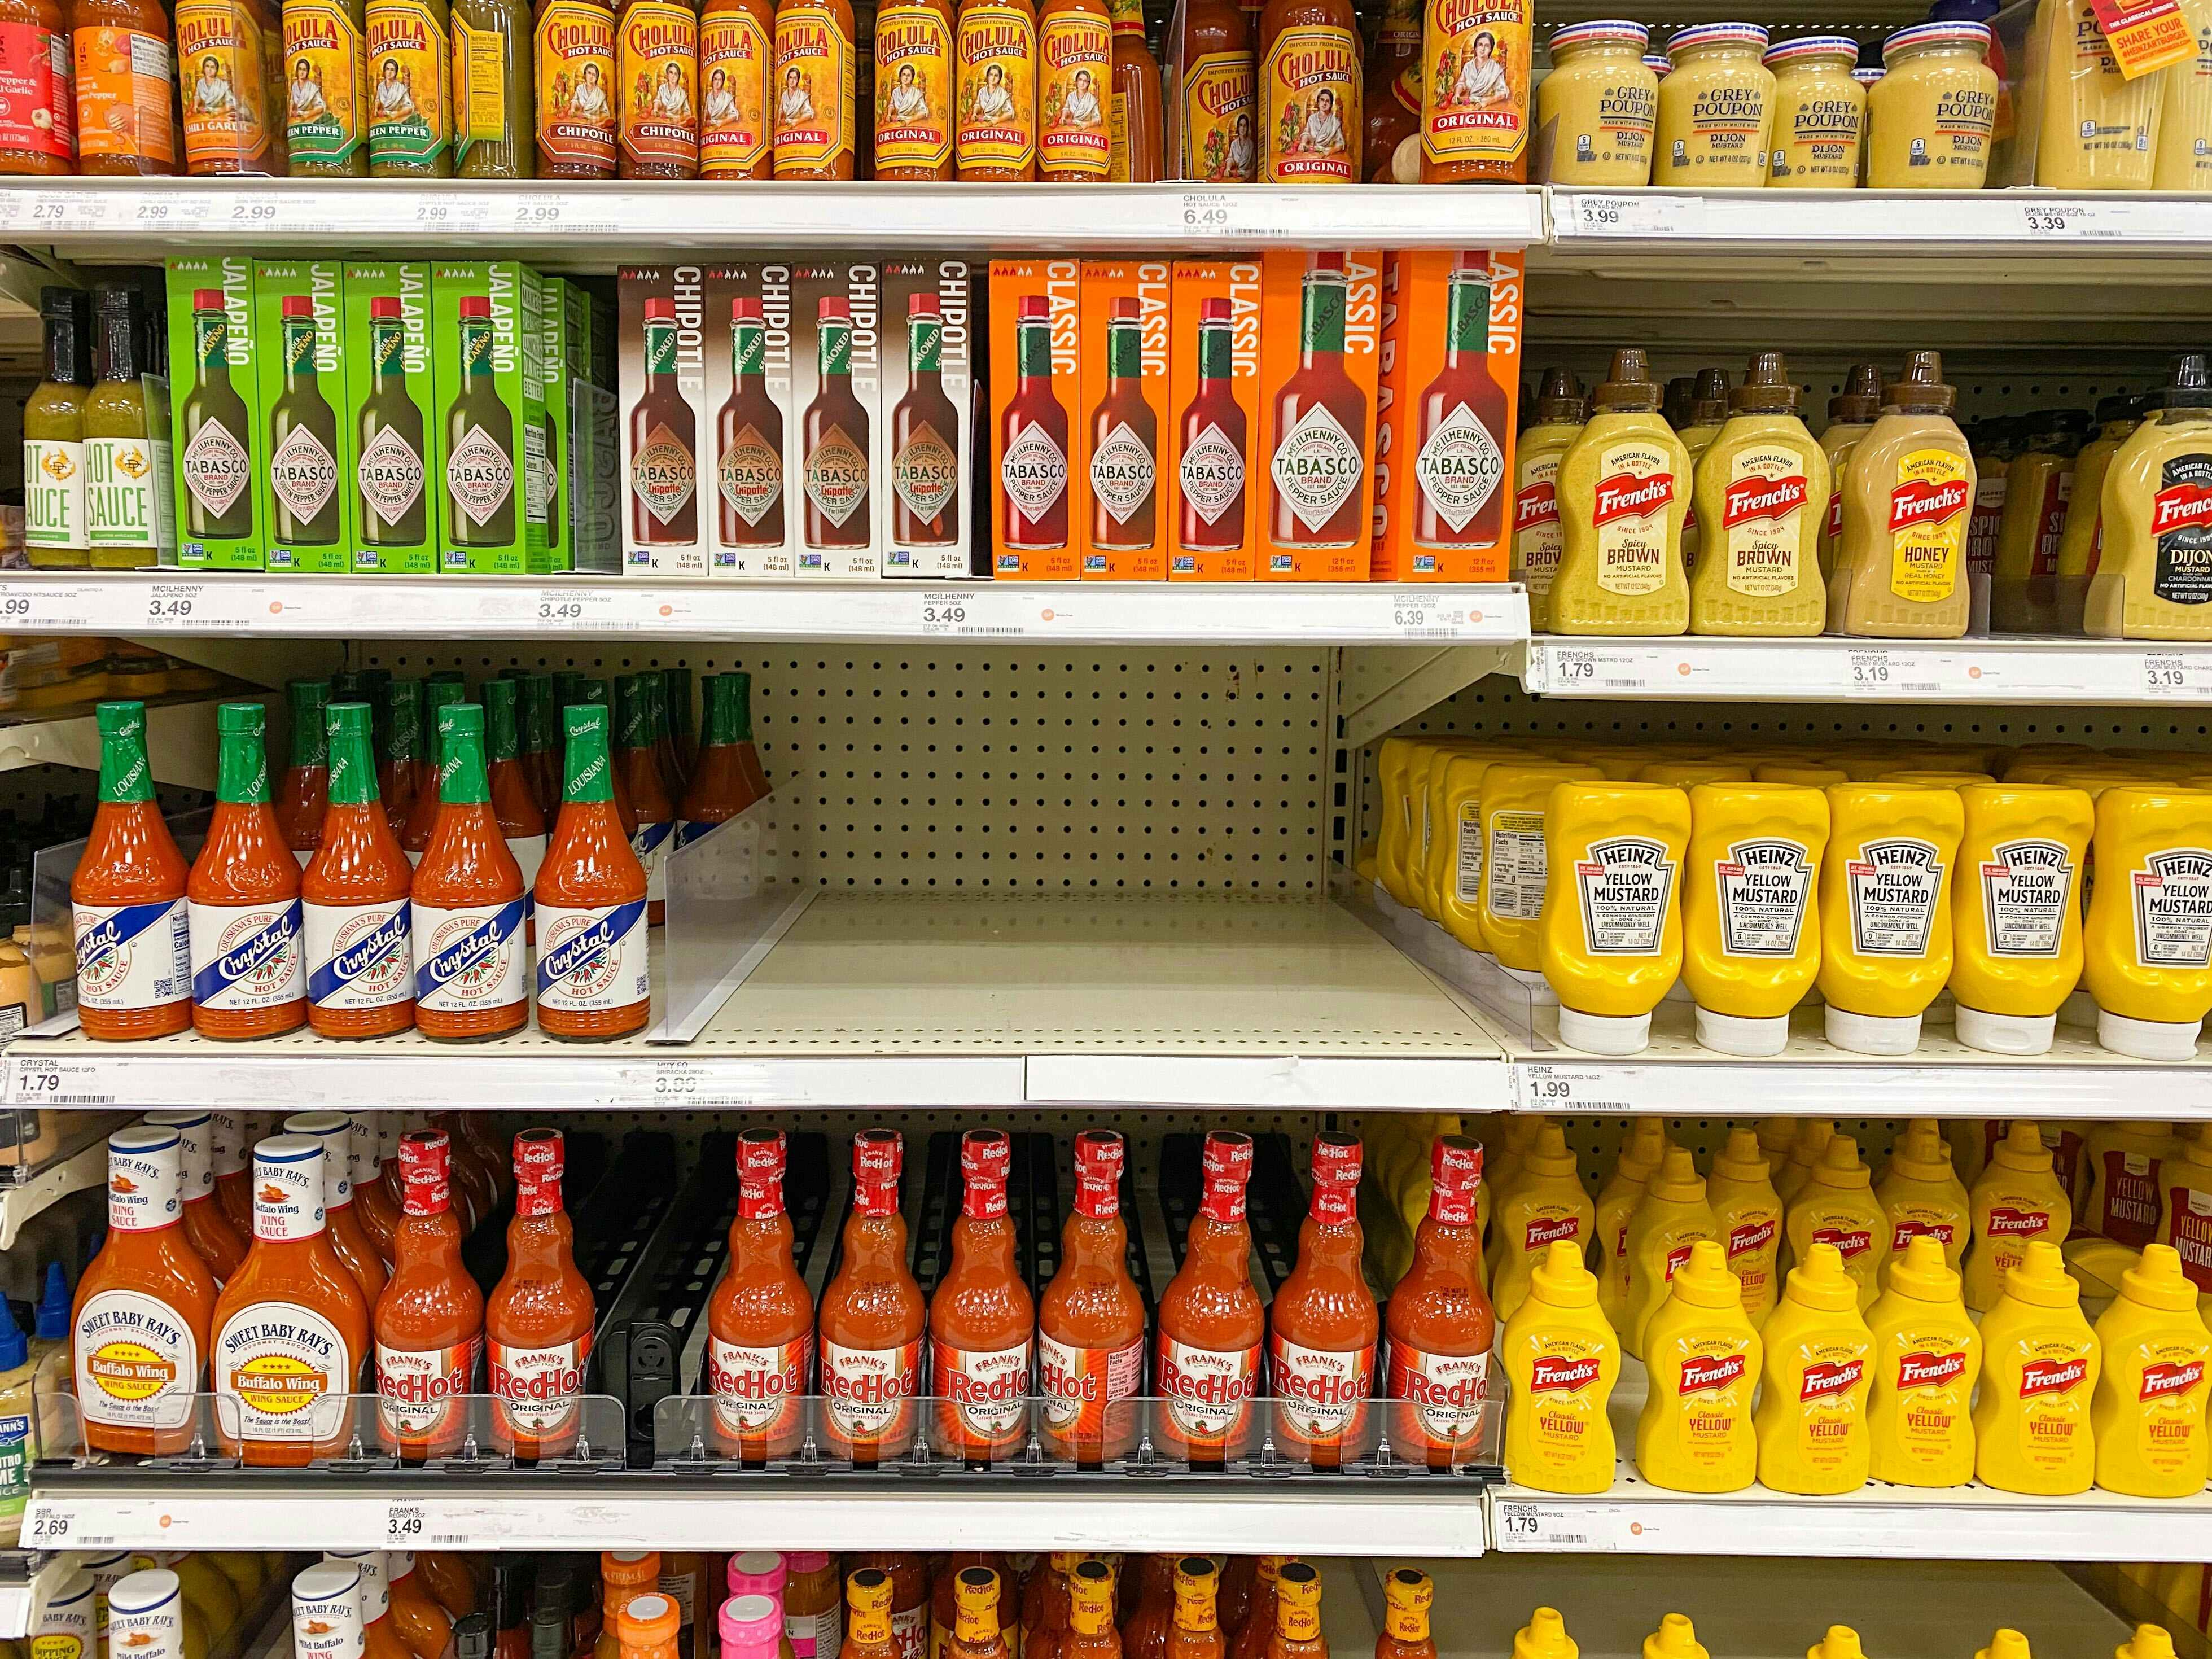 Target shelves showing full inventory for everything except Sriracha hot sauce